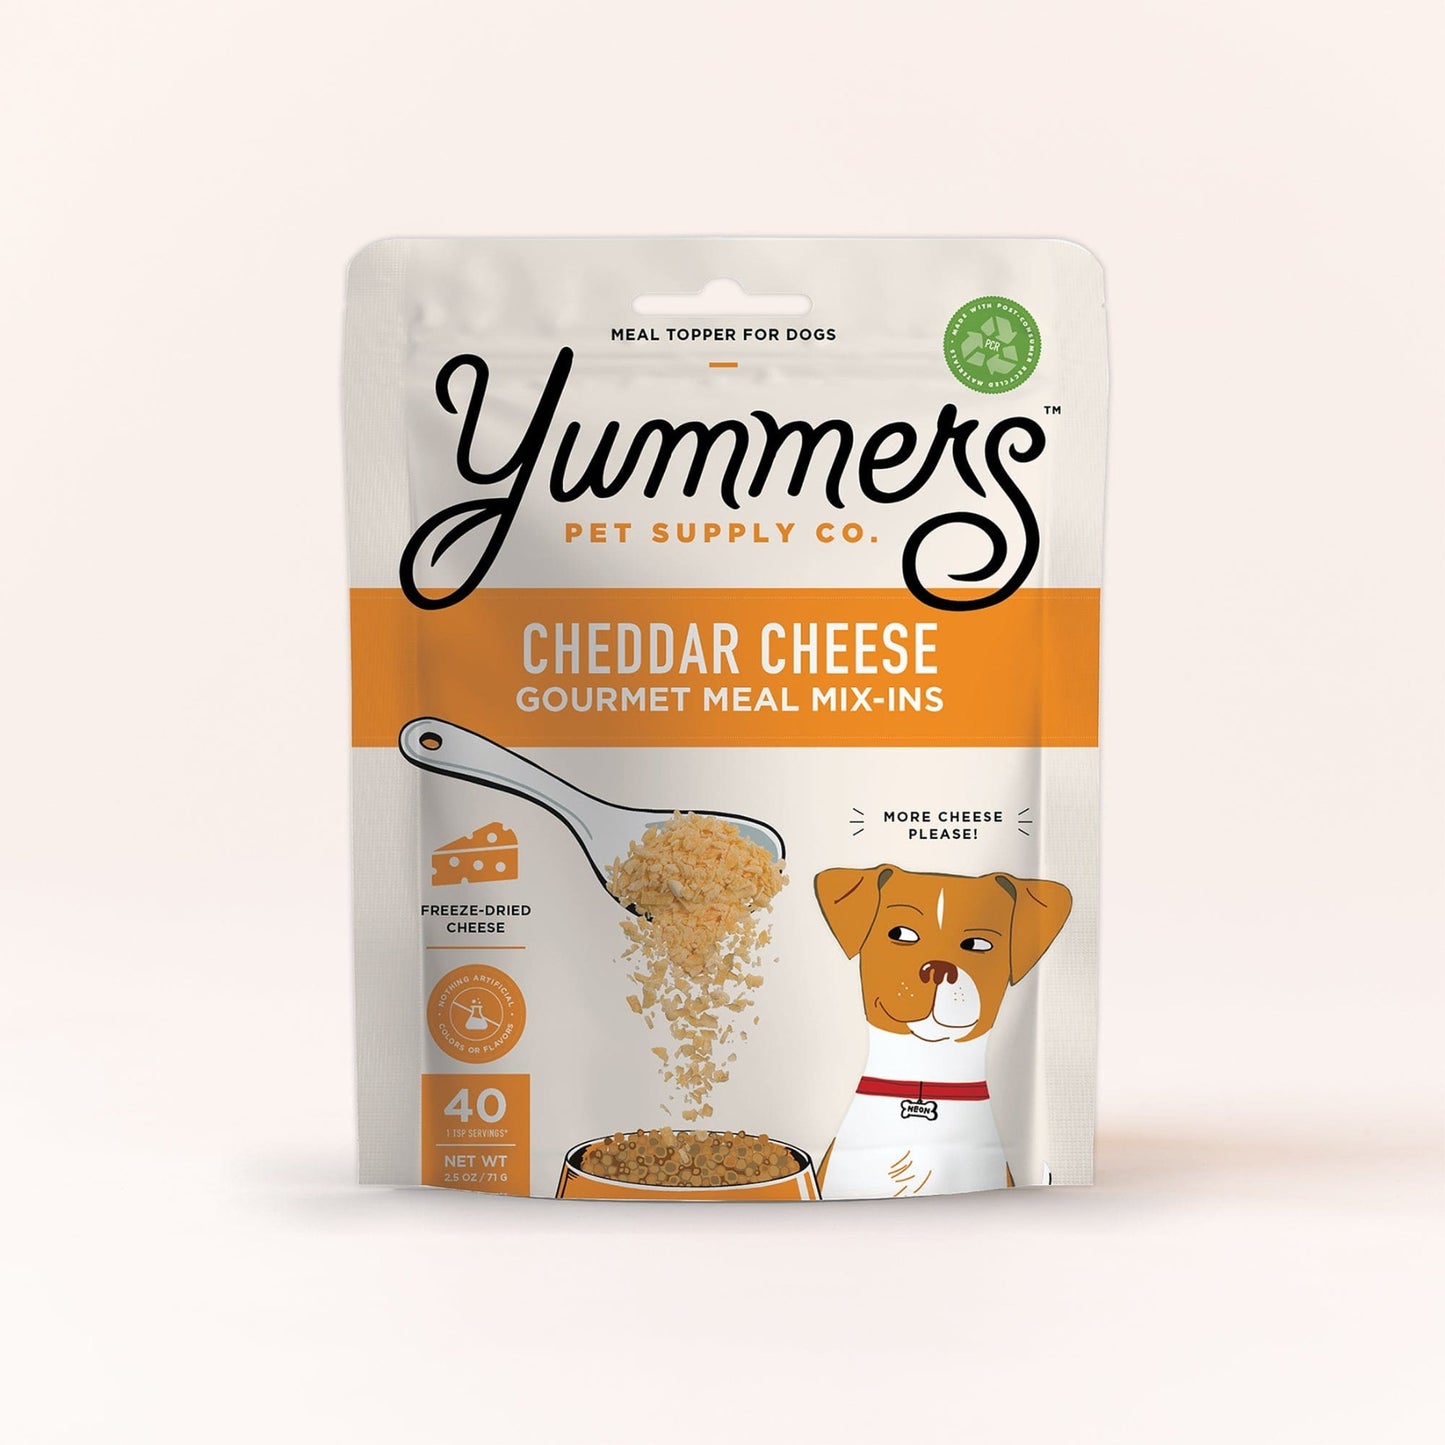 Yummers Freeze-dried Cheese